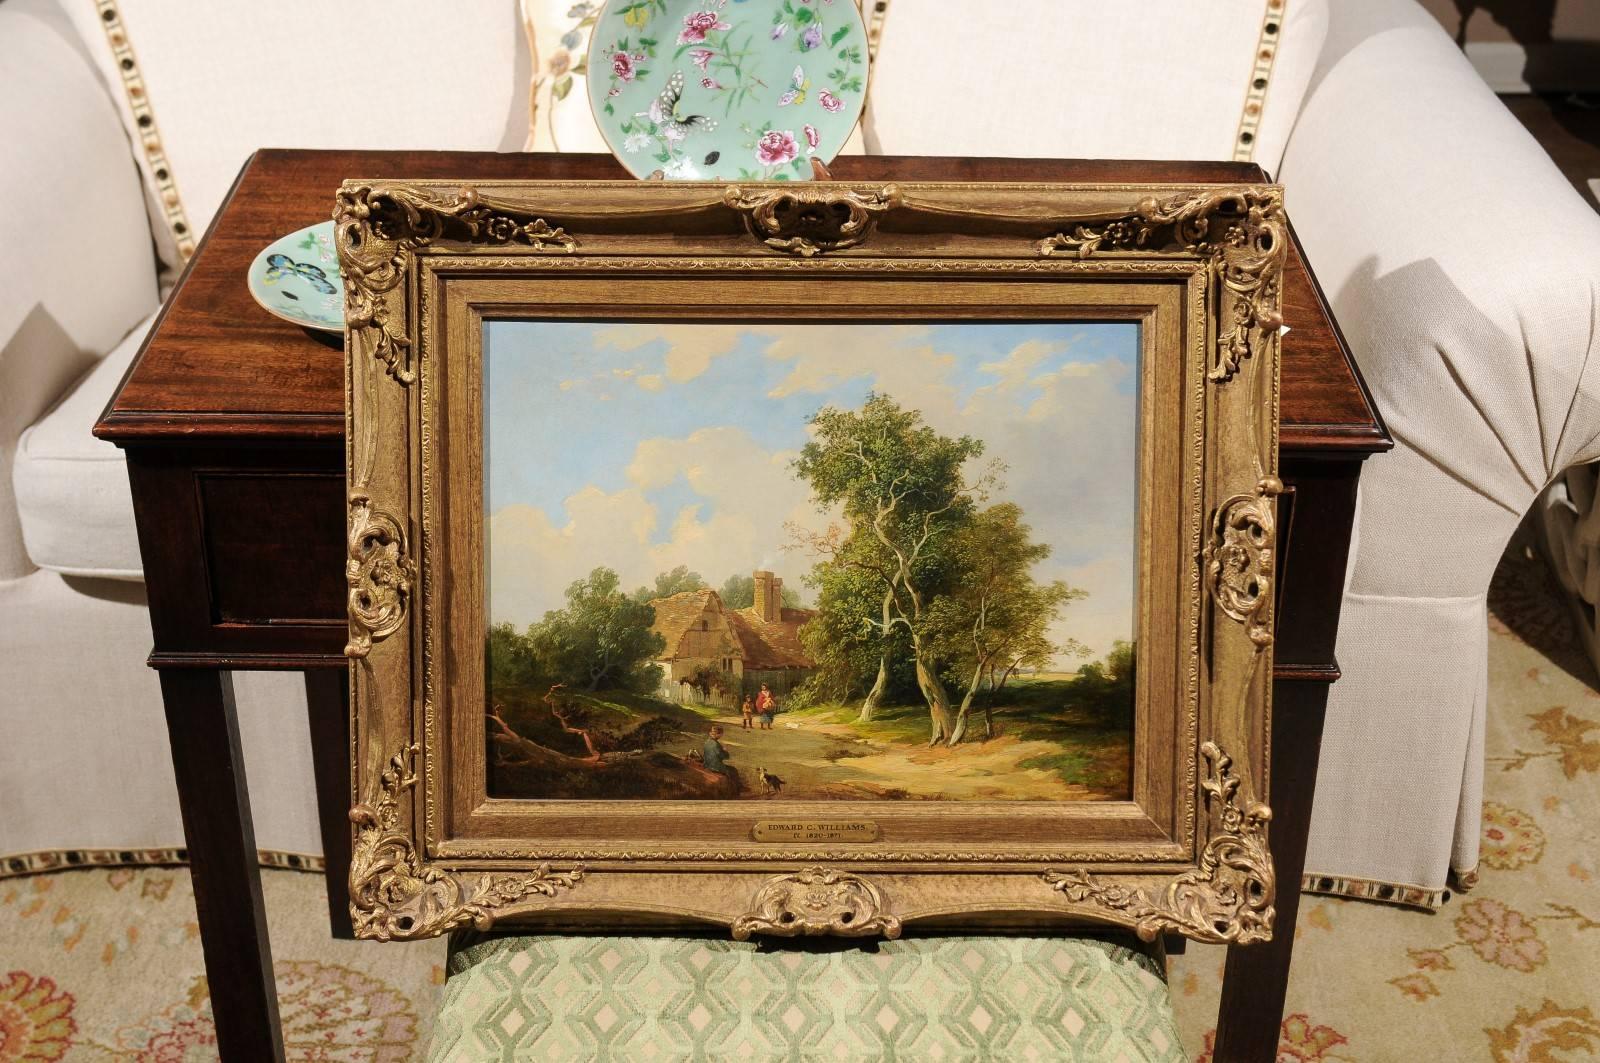 A beautiful English landscape painting oil on board which reveals the seal of three King's crests. A work of quality which captures the diversity of color throughout the painting.
Williams is from a family of artists. He and his five brothers all